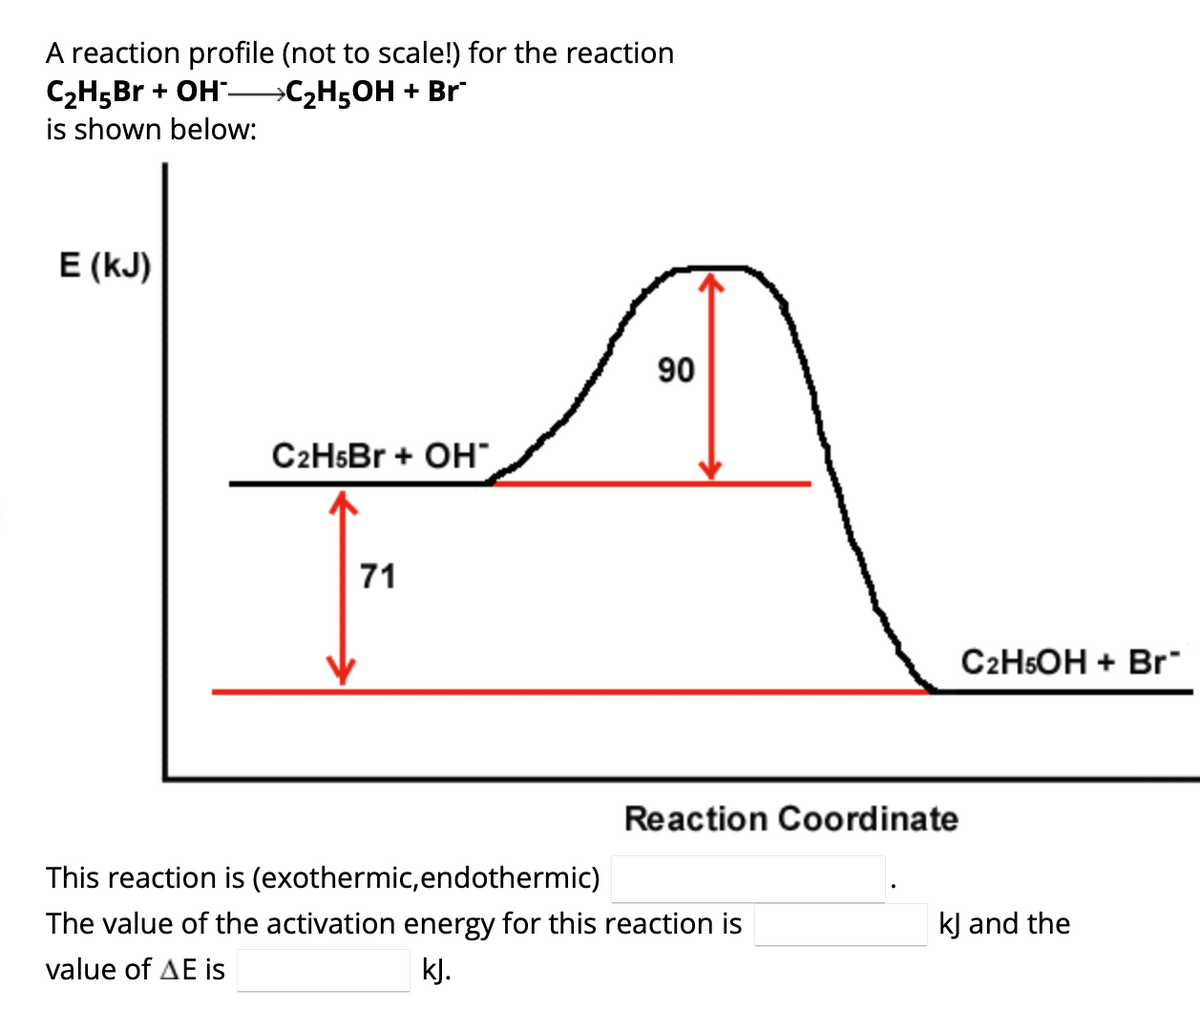 A reaction profile (not to scale!) for the reaction
C₂H5Br + OH-
is shown below:
→C₂H5OH + Br
E (kJ)
C2H5Br + OH
71
90
Reaction Coordinate
This reaction is (exothermic, endothermic)
The value of the activation energy for this reaction is
value of AE is
kJ.
C2H5OH + Br"
kJ and the